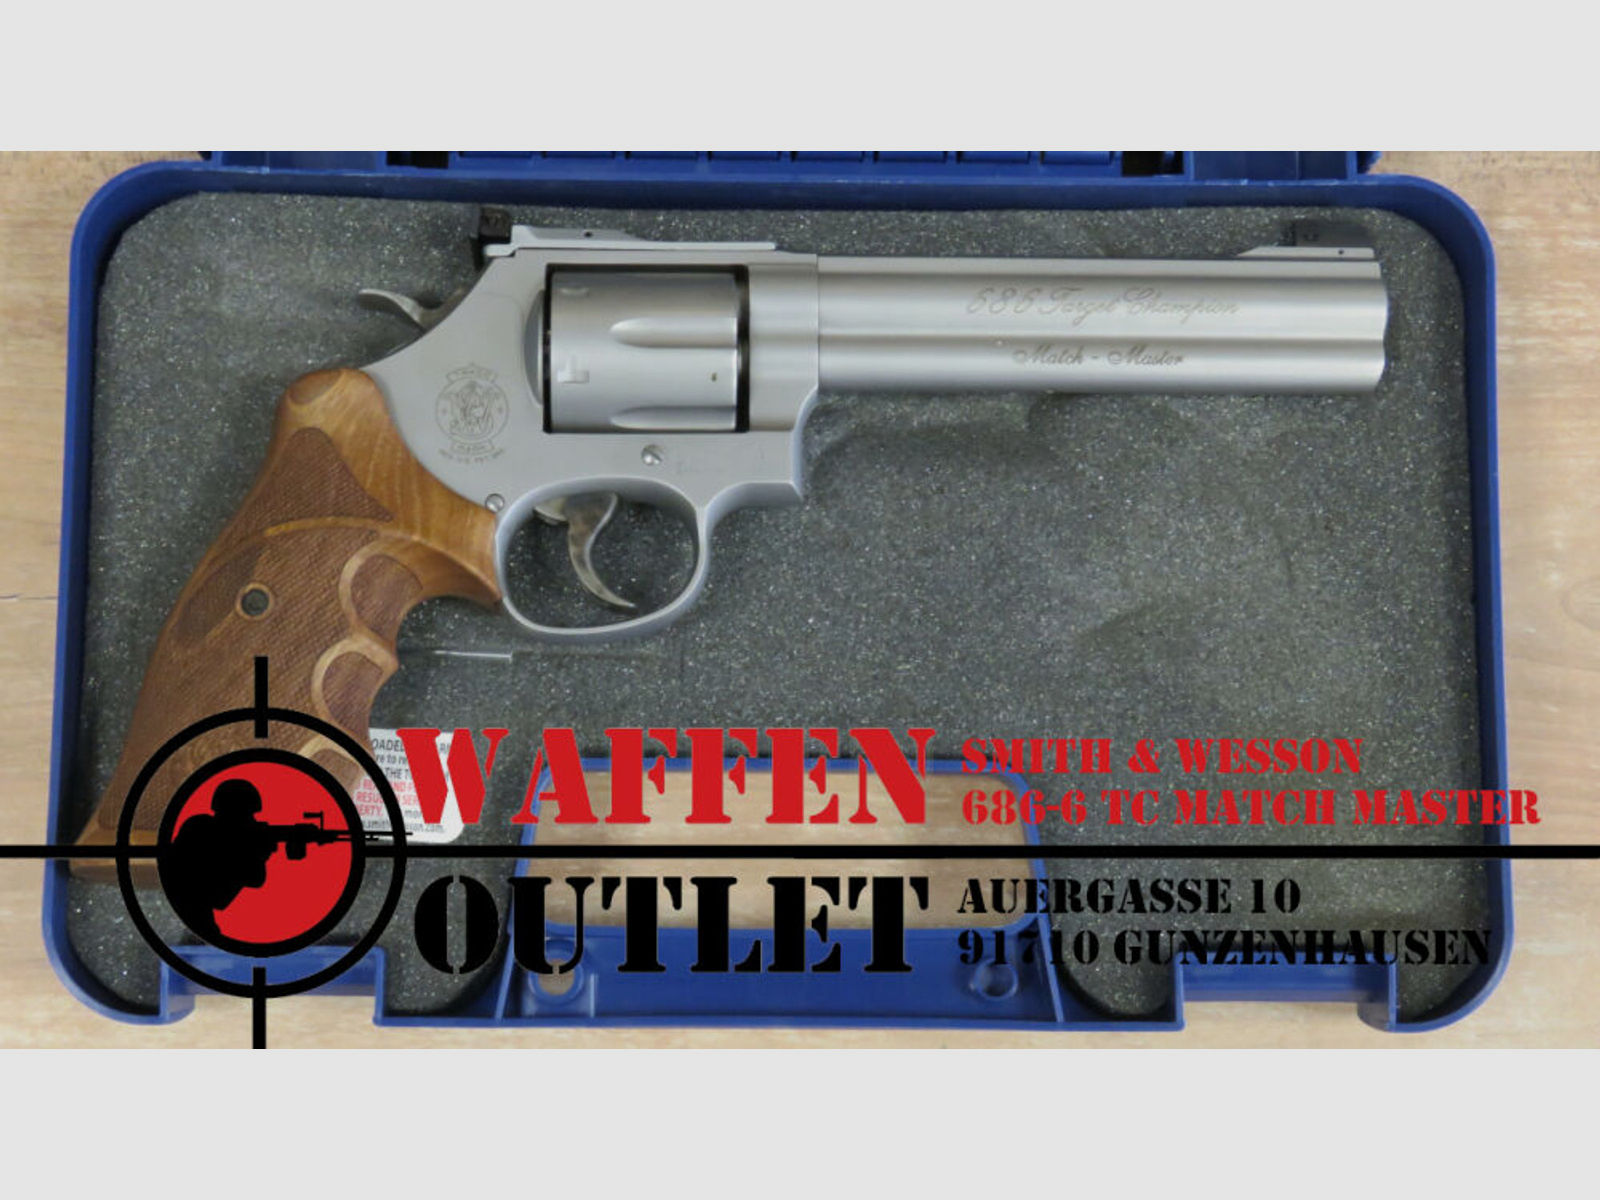 Smith & Wesson	 Model 686-6 Target Champion Match Master